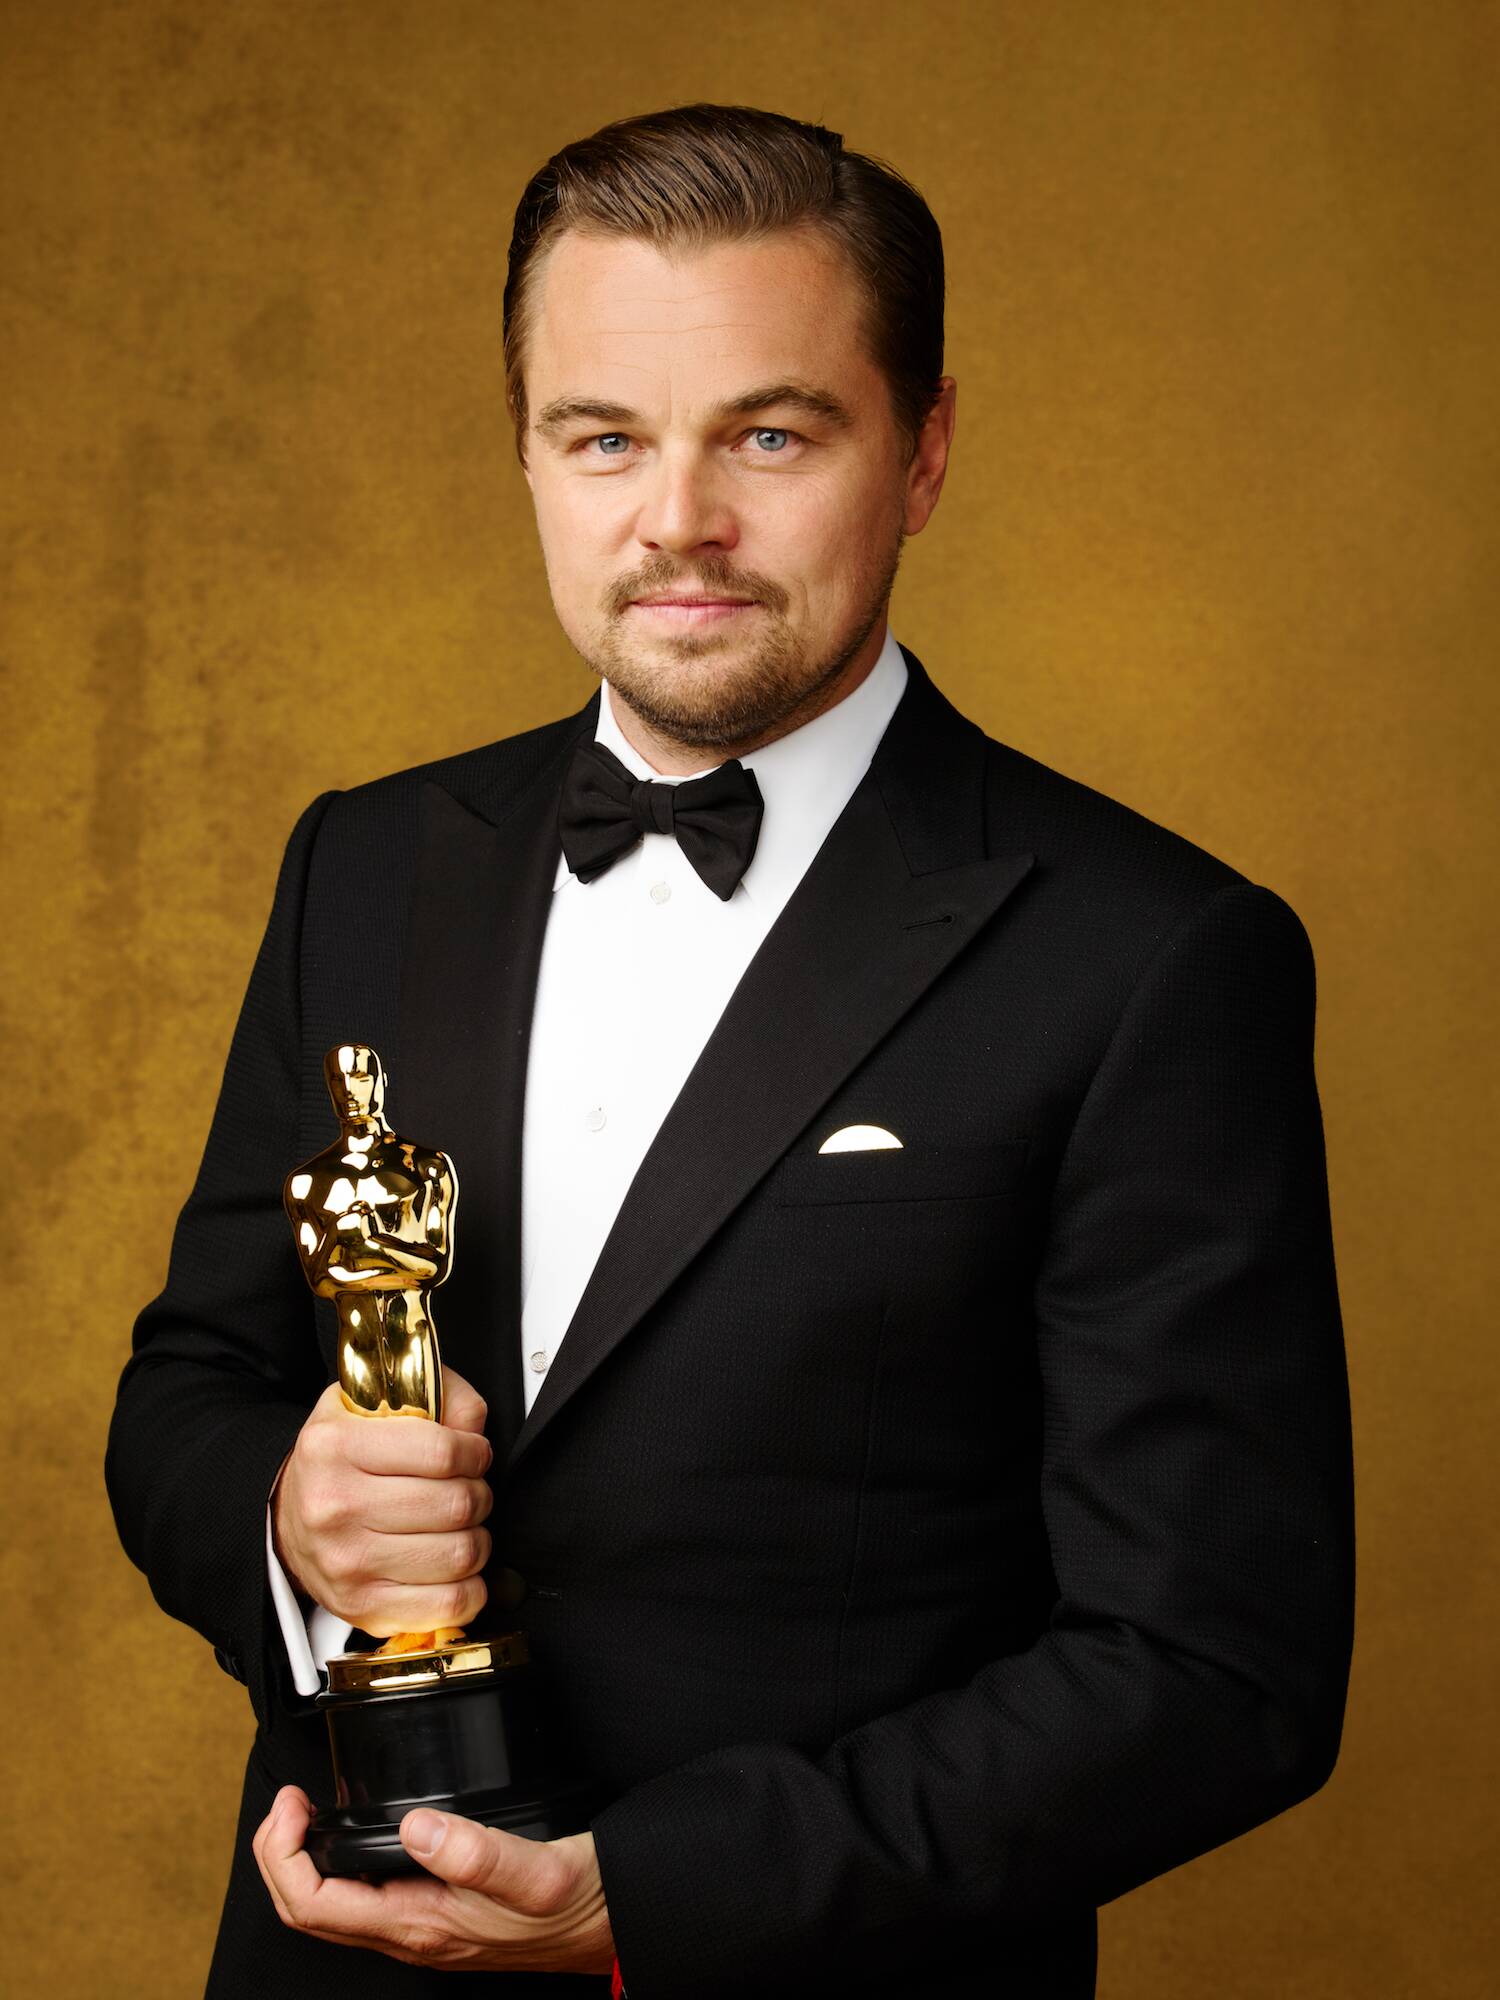 88th Oscars: Winners Portraits | Oscars.org | Academy of Motion Picture Arts and Sciences